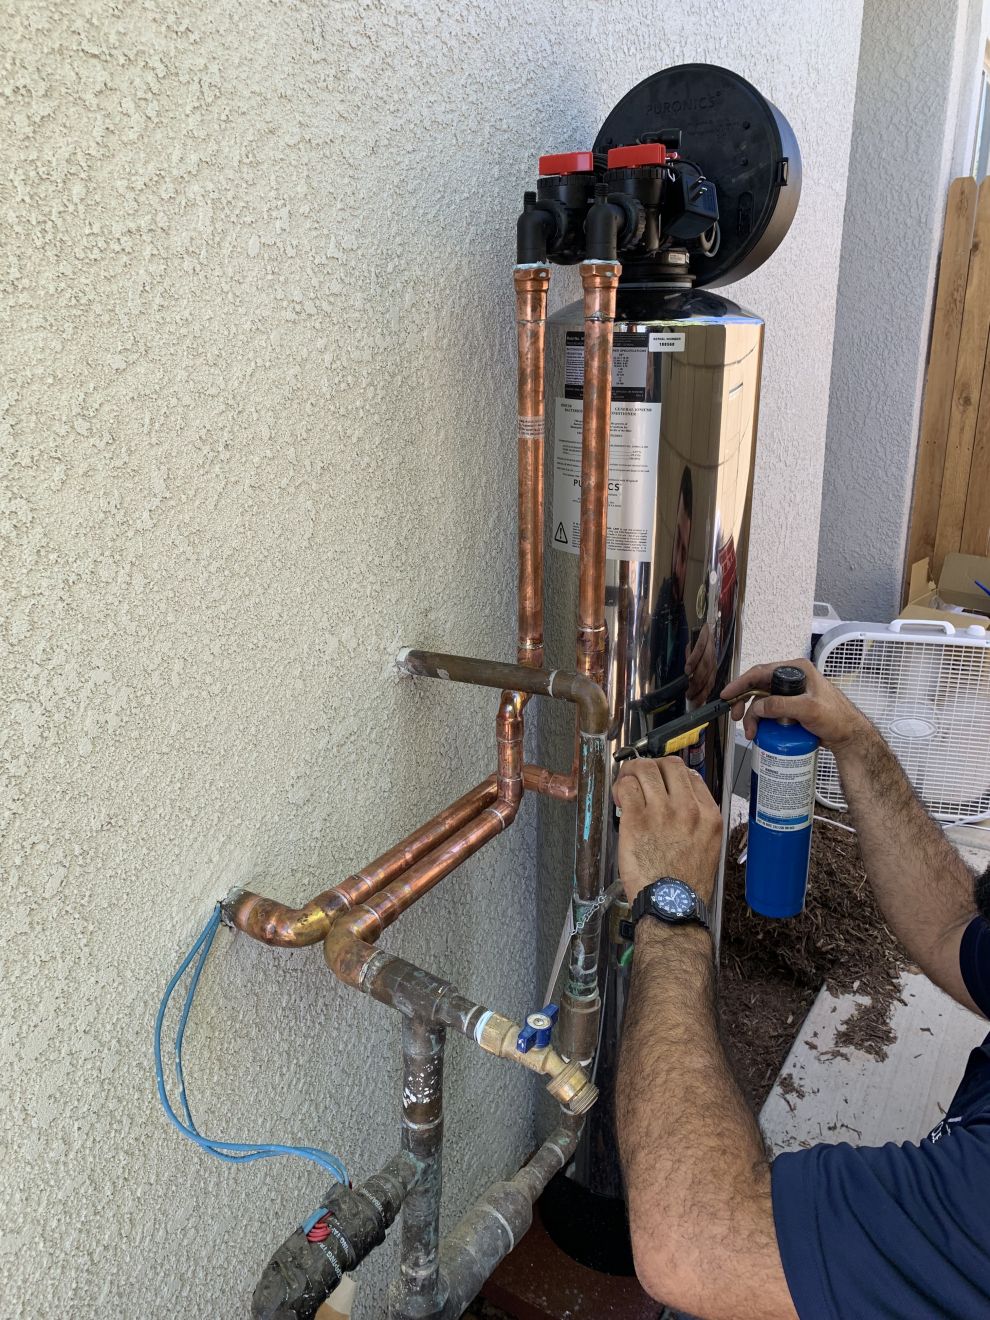 Our water install technicians will get your home fitted with the best water filtration system for your needs